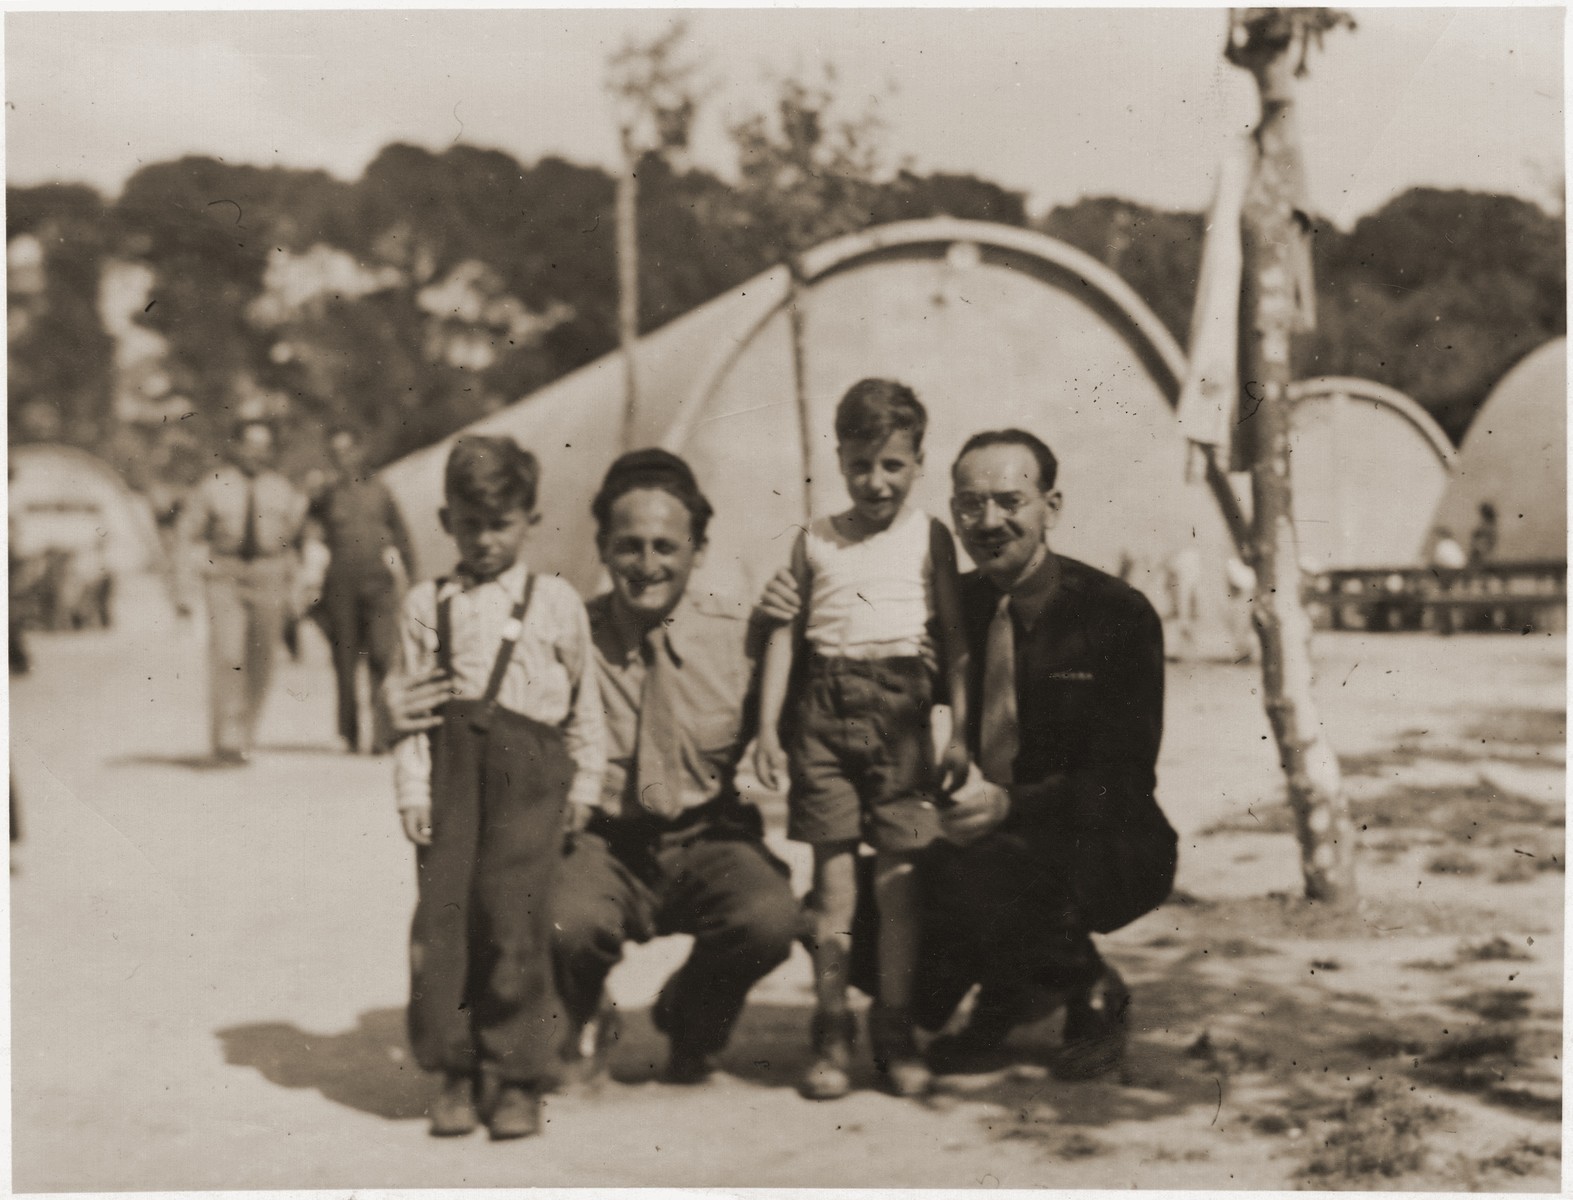 Two Jewish orphans pose with two relief workers at the Marsylia transit camp (a former Yugoslav POW camp) in Marseilles, where they await their departure for Palestine aboard the SS Champollion.  

The two boys belong to a group from the Bergen-Belsen displaced persons' camp who have been selected for the first authorized children's transport to Palestine.